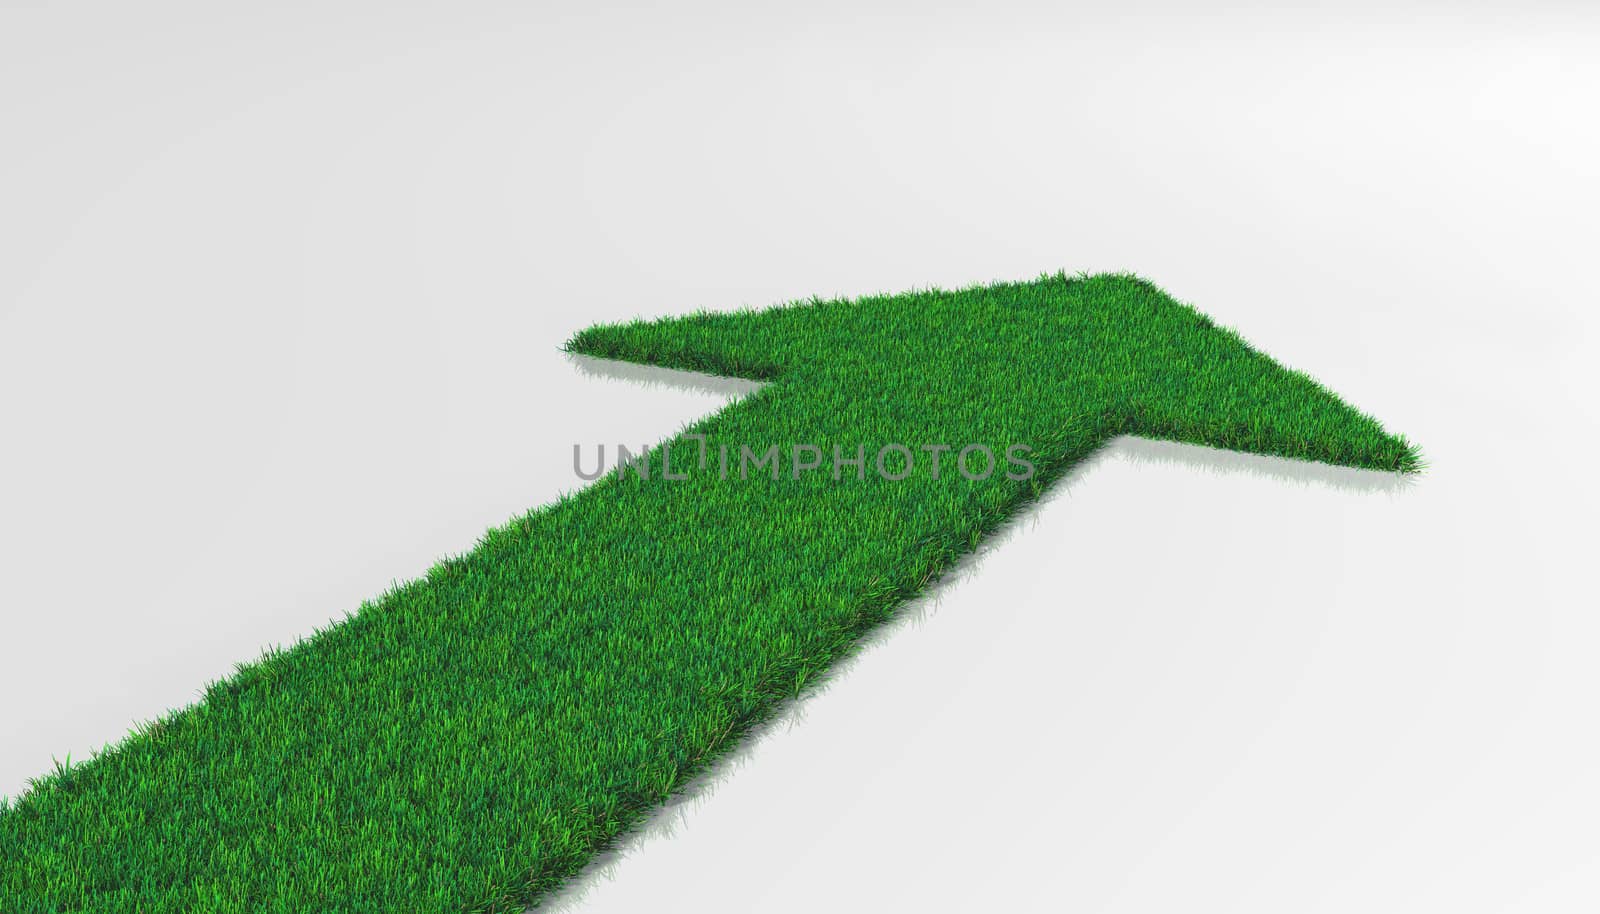 a carpet of grass on a white background ends with one arrow that indicates a forward direction